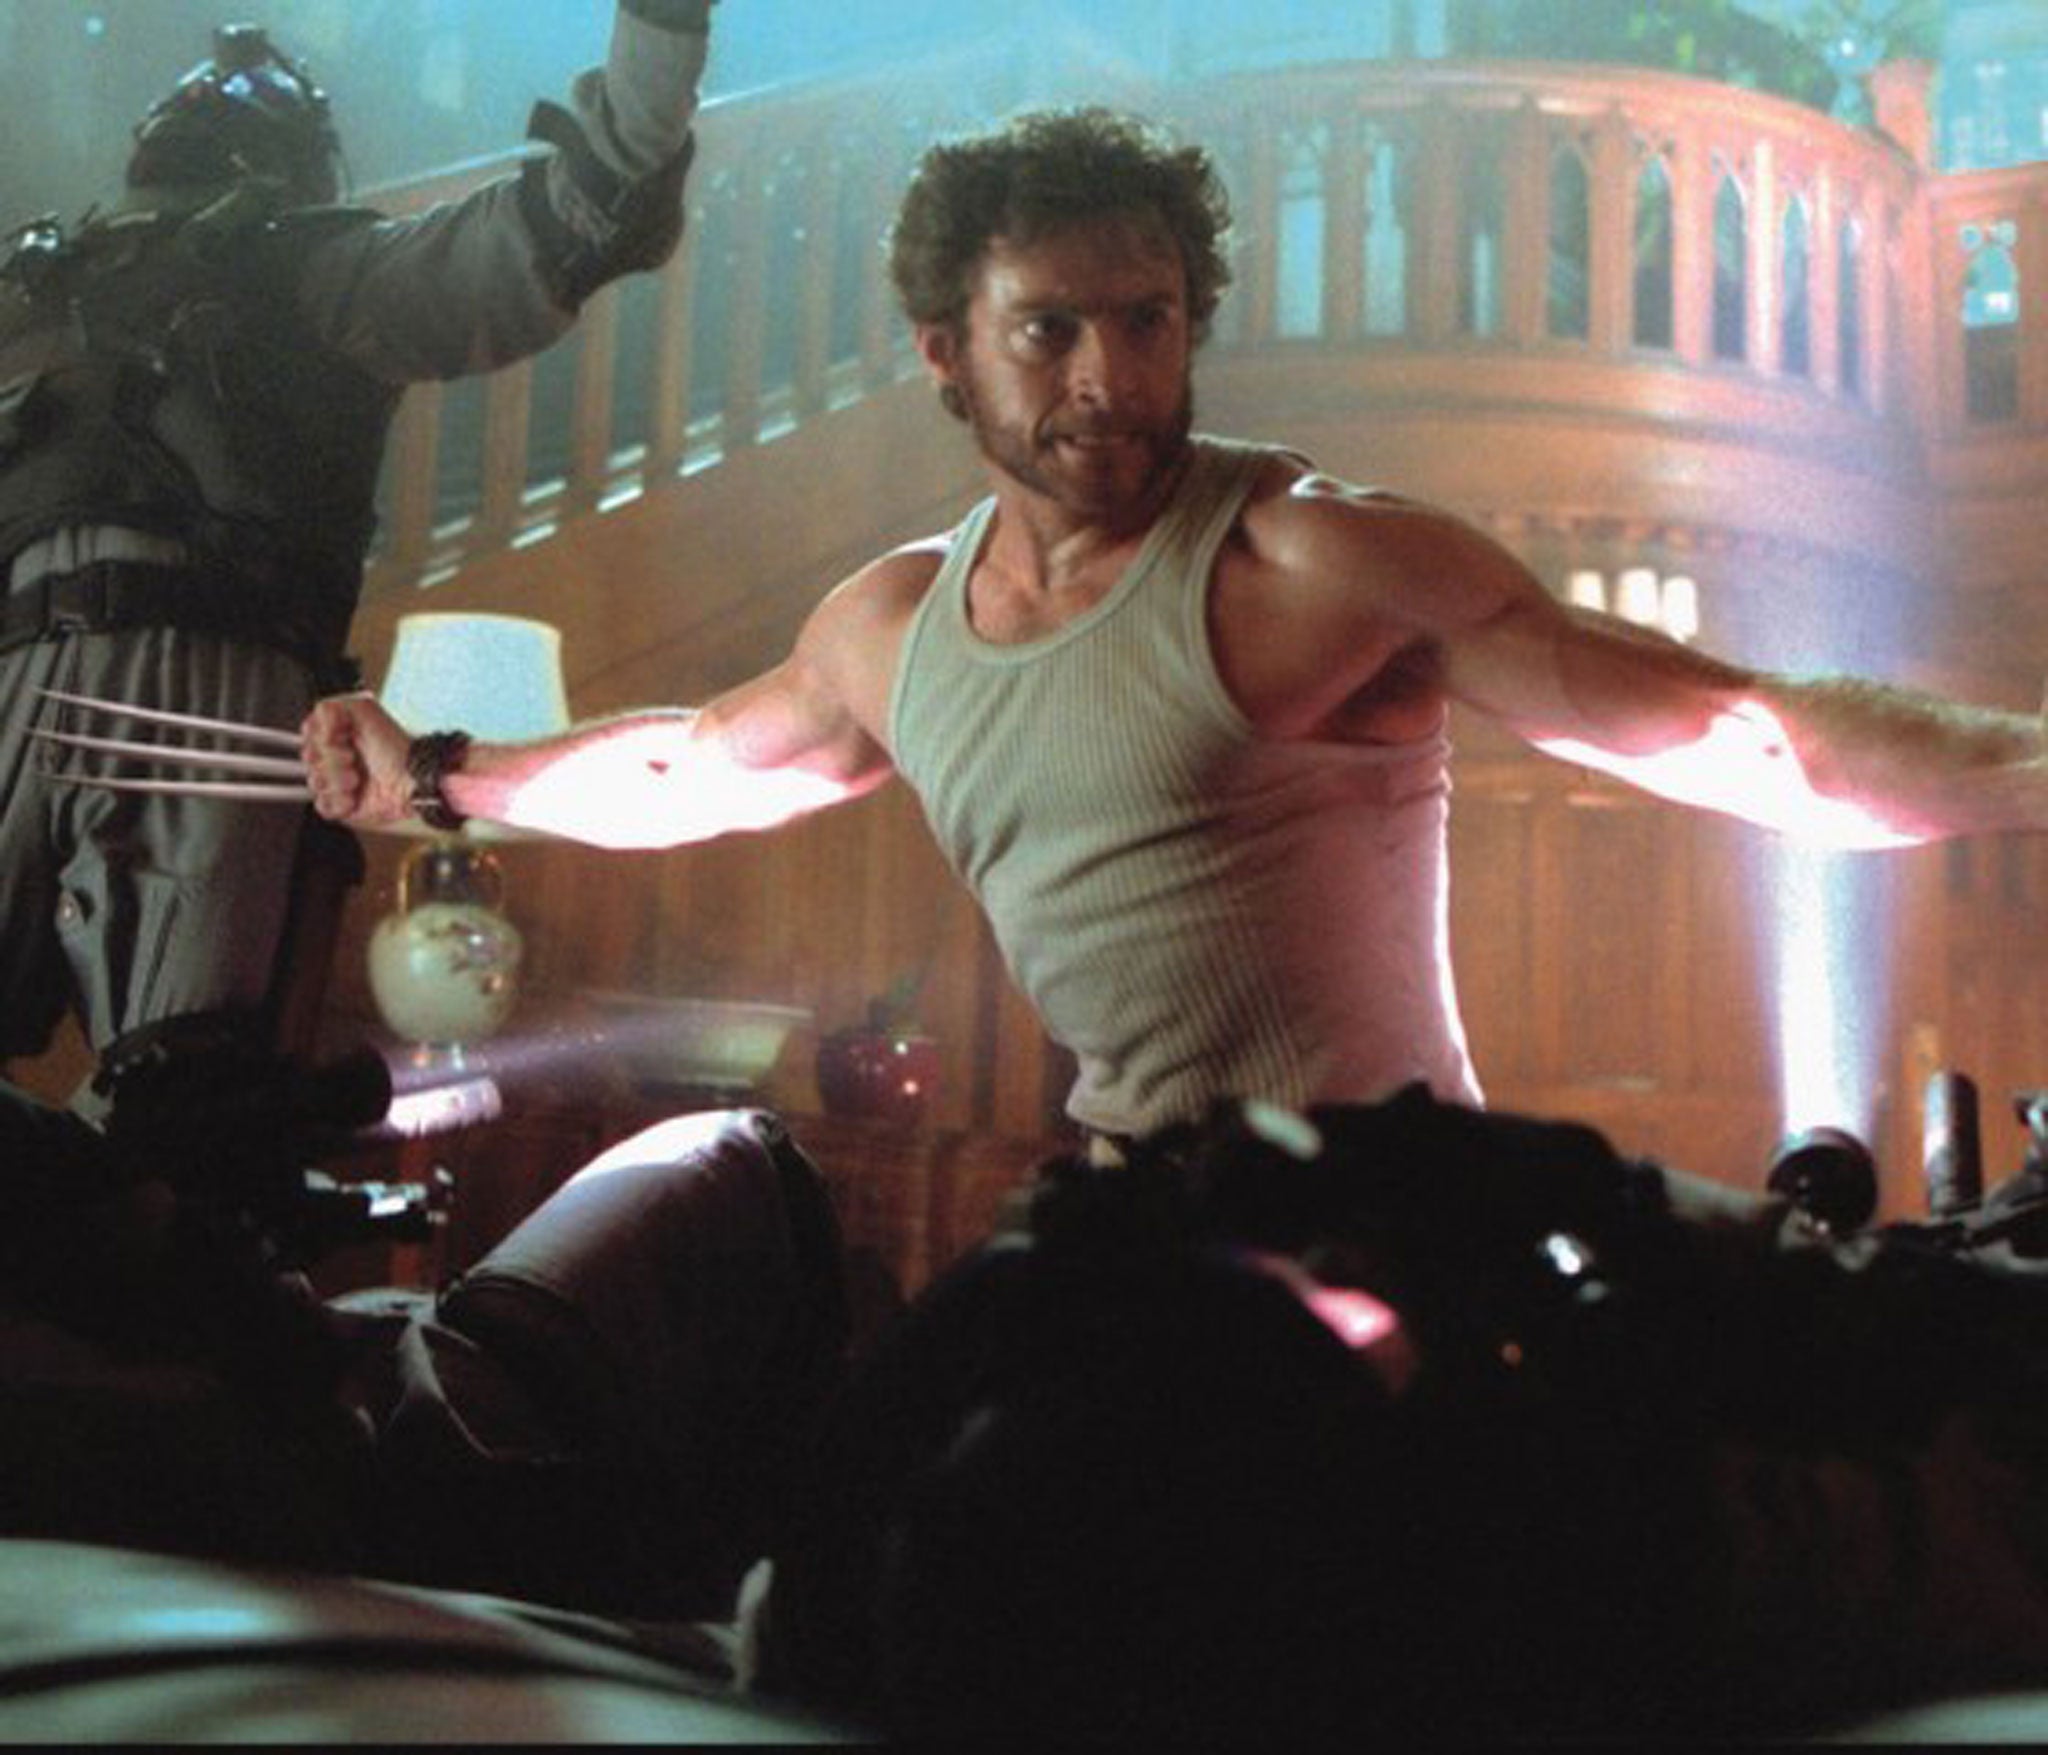 Hugh Jackman as Wolverine in X-Men - the BBFC was urged to become more restrictive on the depiction of violence at all age categories